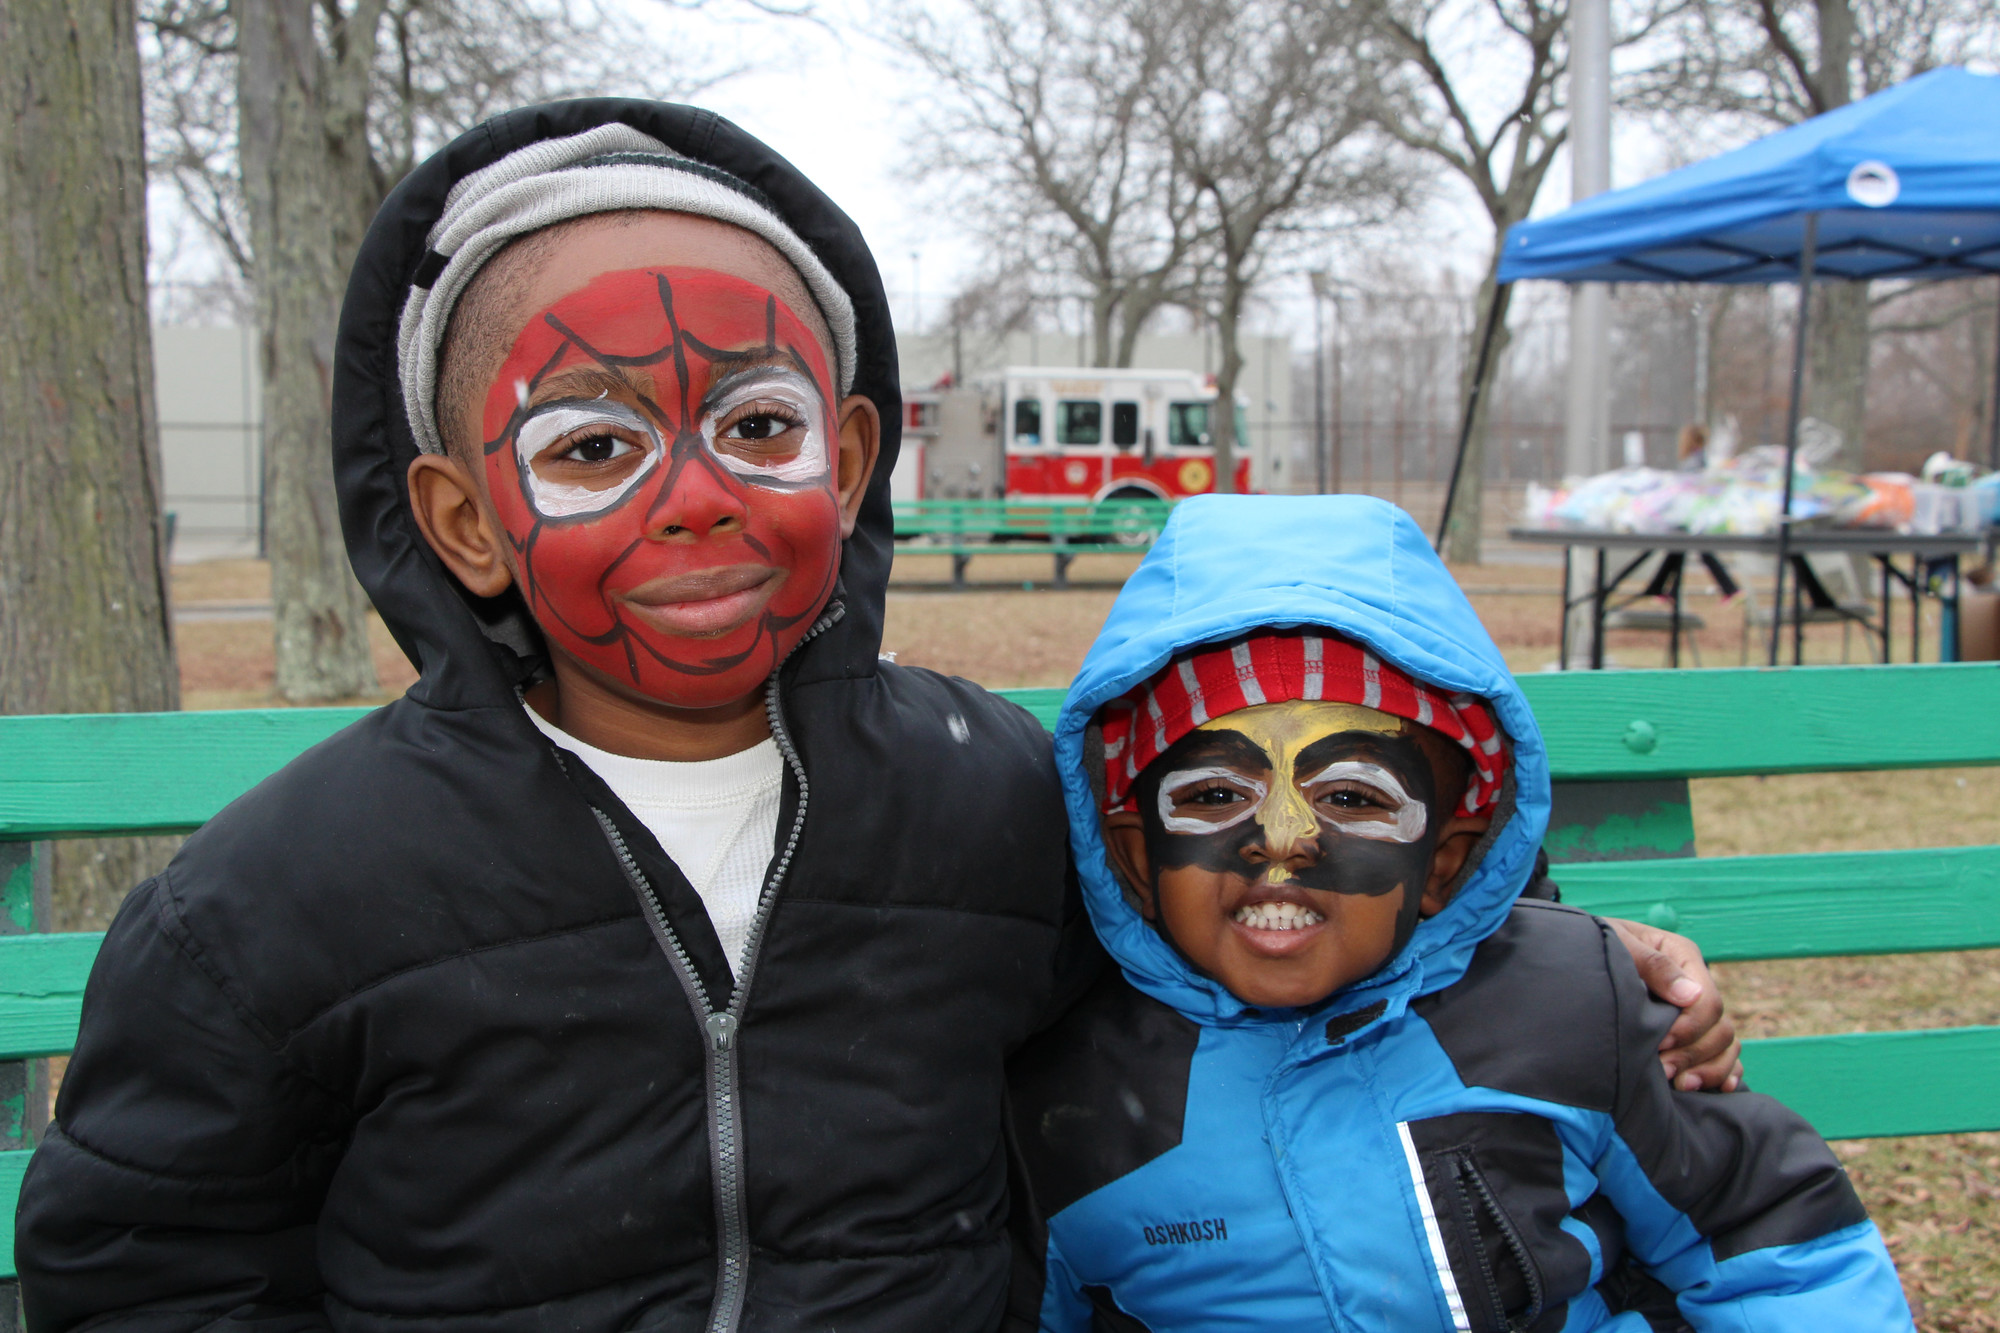 Nicholas Delva, 7, and his younger brother Brandon, 3, got their faces painted like some of their favorite super heroes.